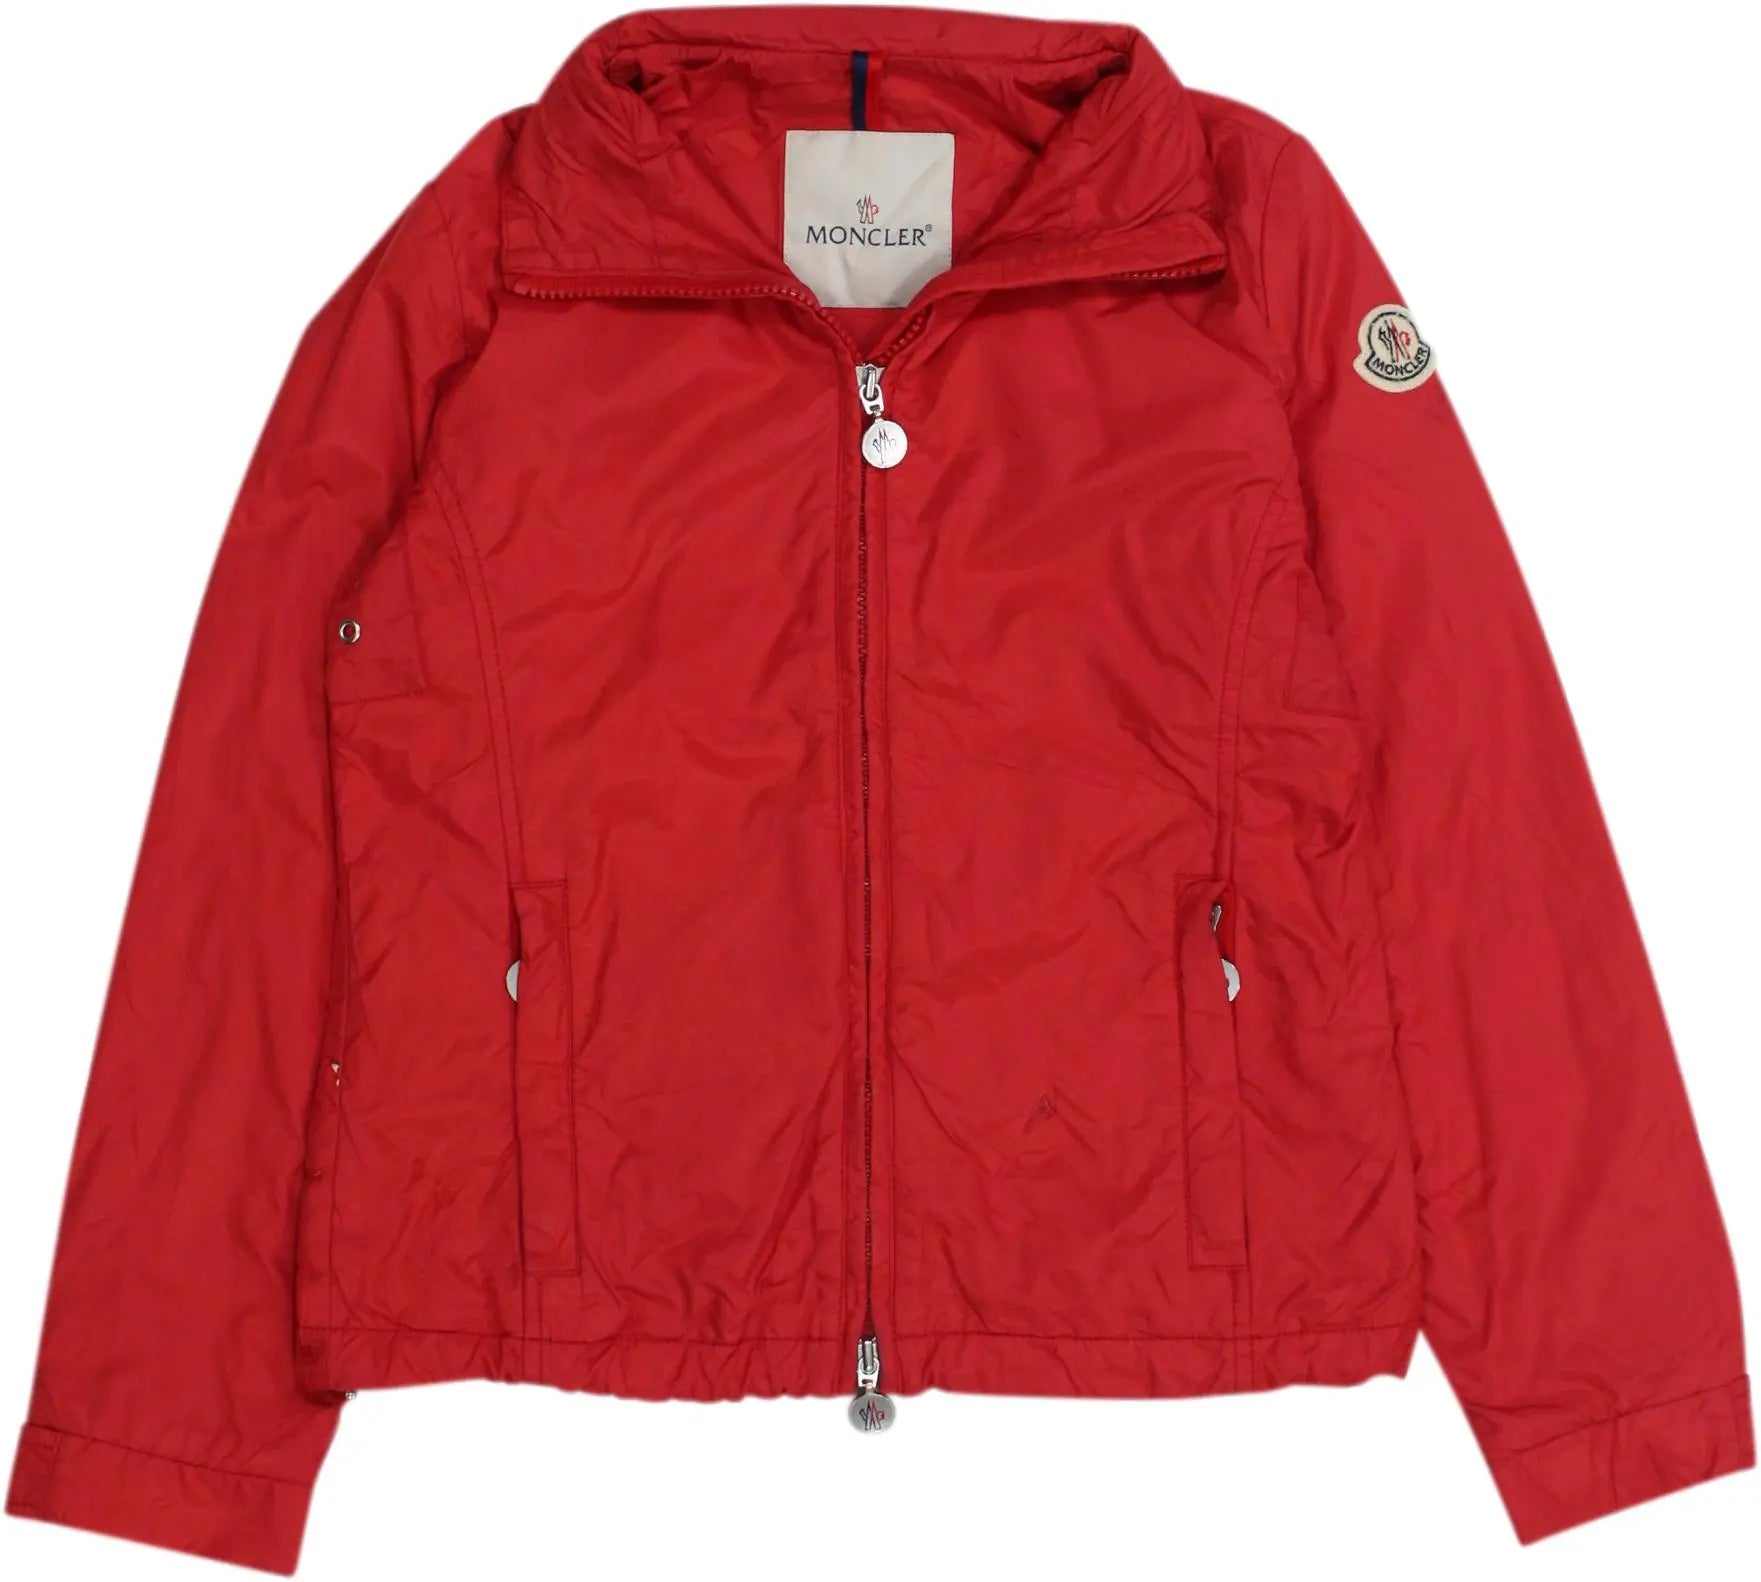 Moncler - Red Jacket by Moncler- ThriftTale.com - Vintage and second handclothing